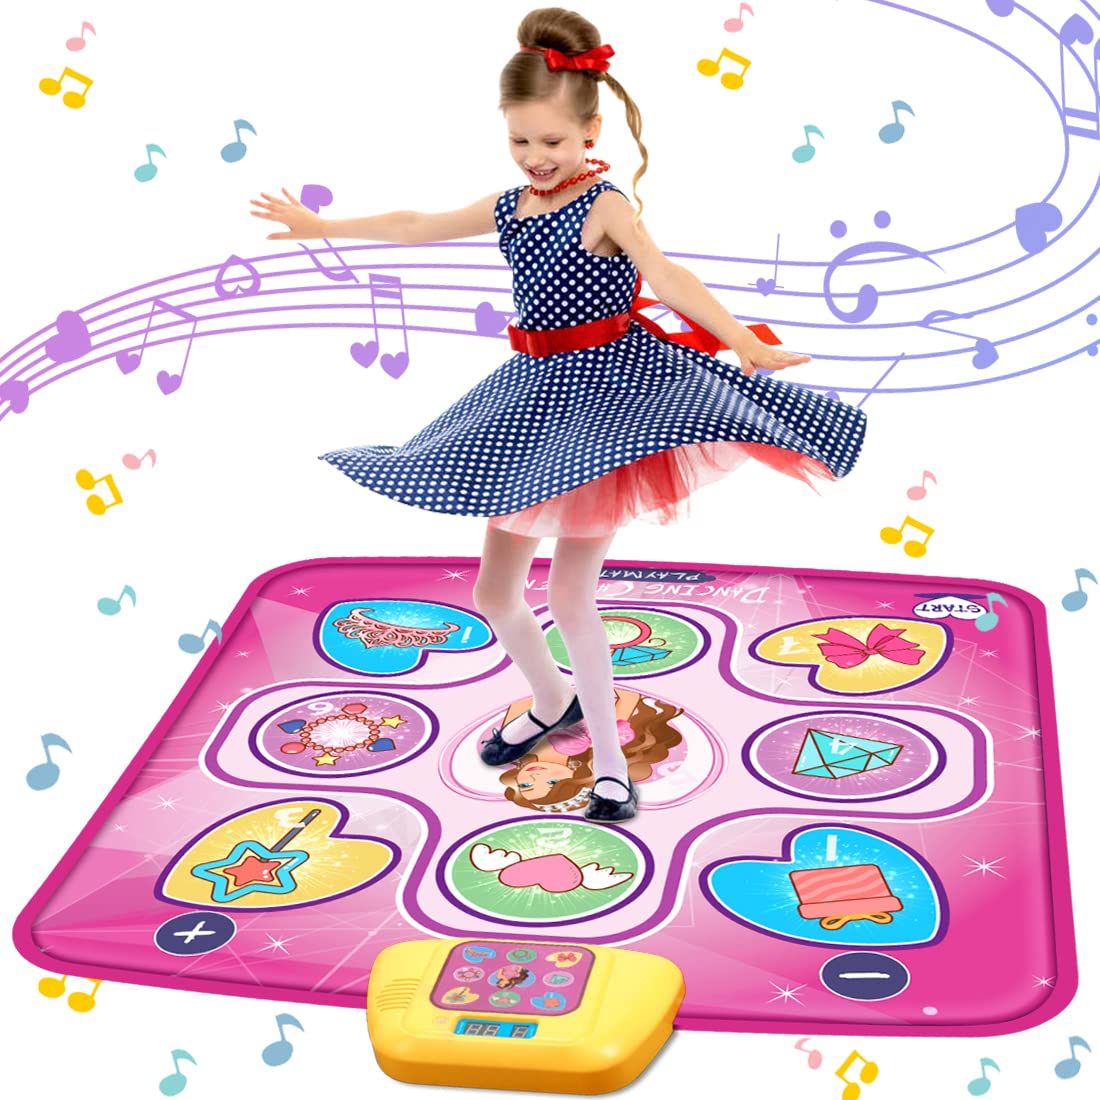 Bambilo Dance Mat Toys Gift for 3-6 Year Old Girl Birthday Gifts Electronic Dance Pad Game for Kids Girls Toys Age 4 5 6 7 8-12, Create Songs, Built-in Music, 5 Game Modes (Purple)